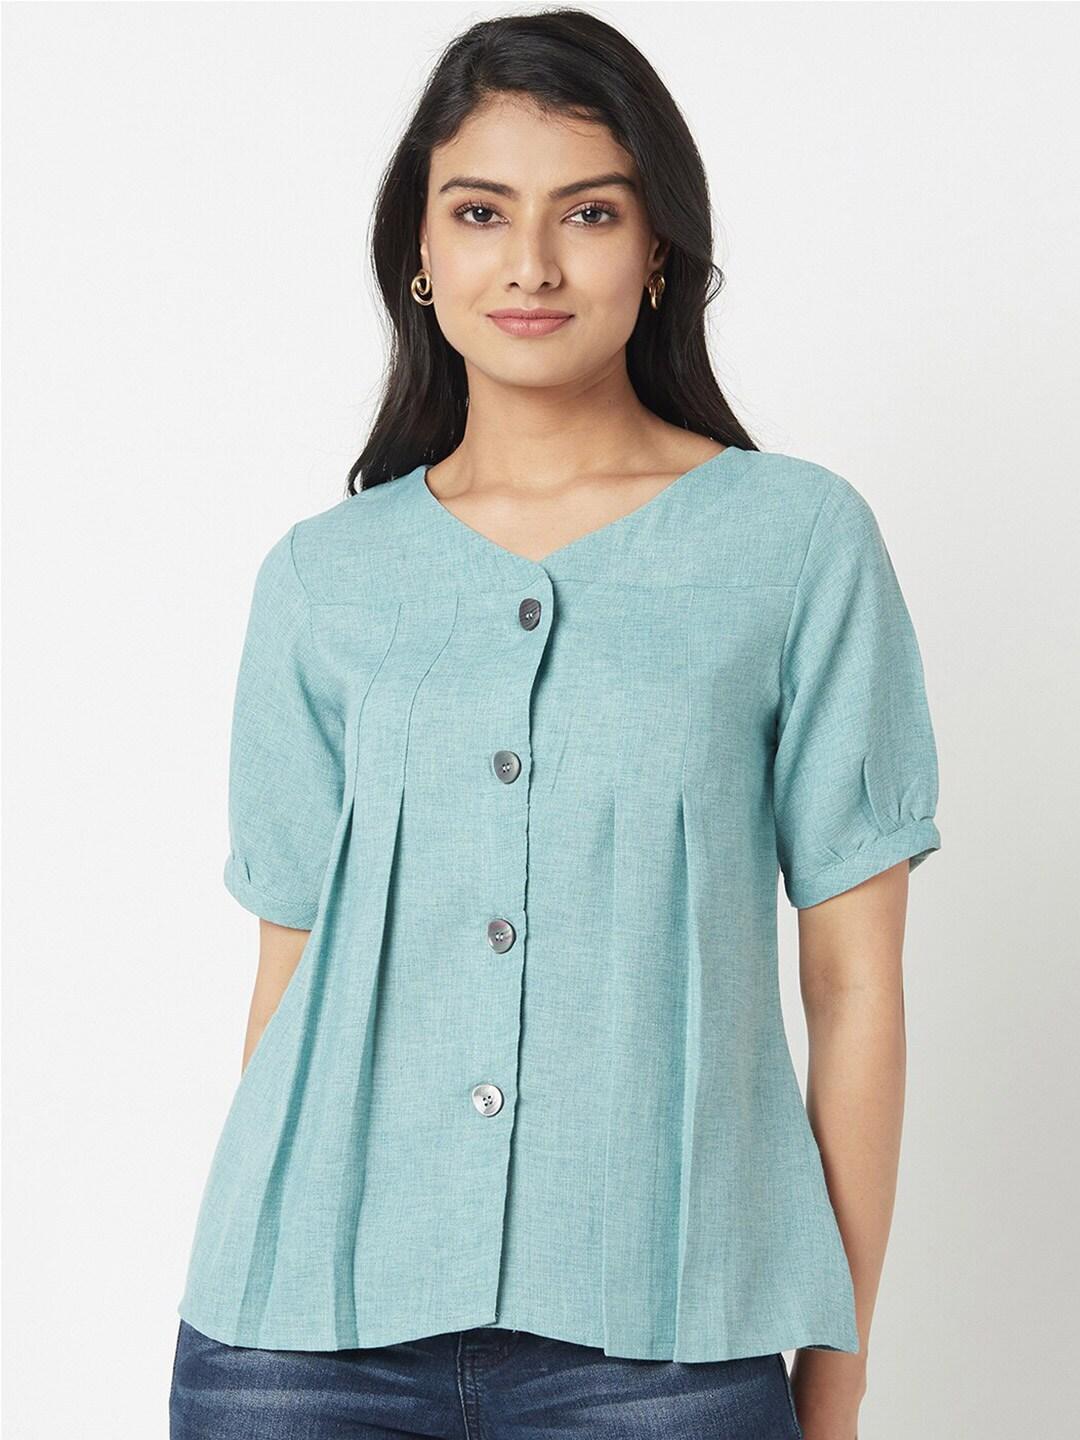 Miss Grace V-Neck Puff Sleeves A-Line Top